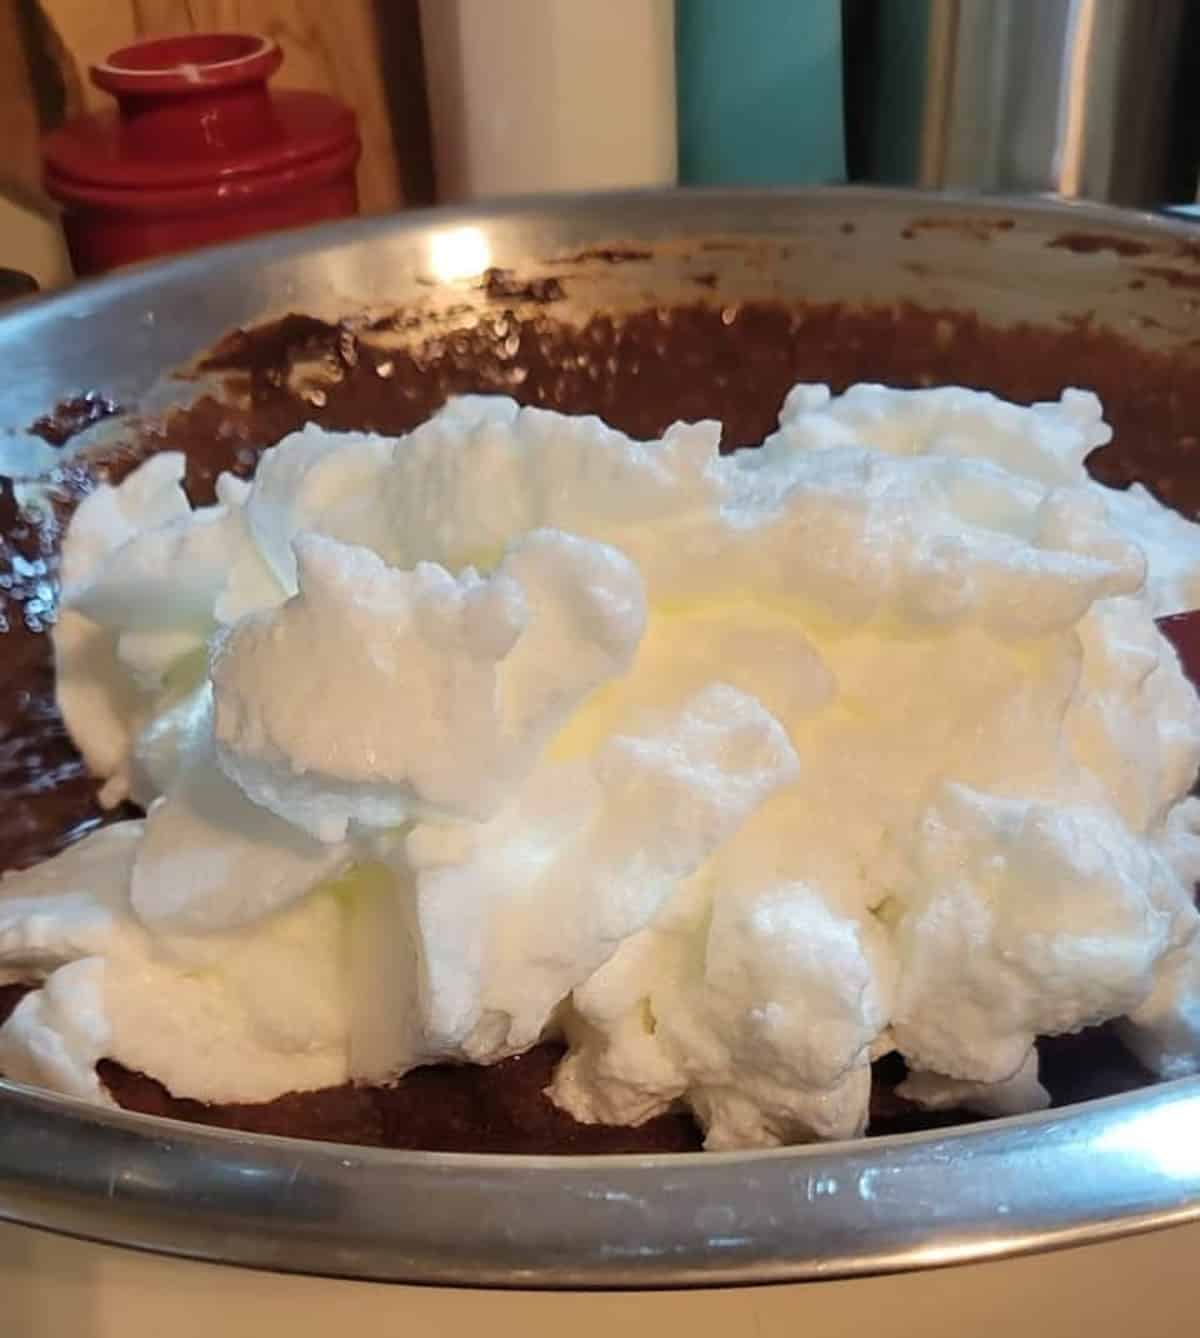 whipped egg whites floating on chocolate mixture in mixing bowl
flourless chocolate torte